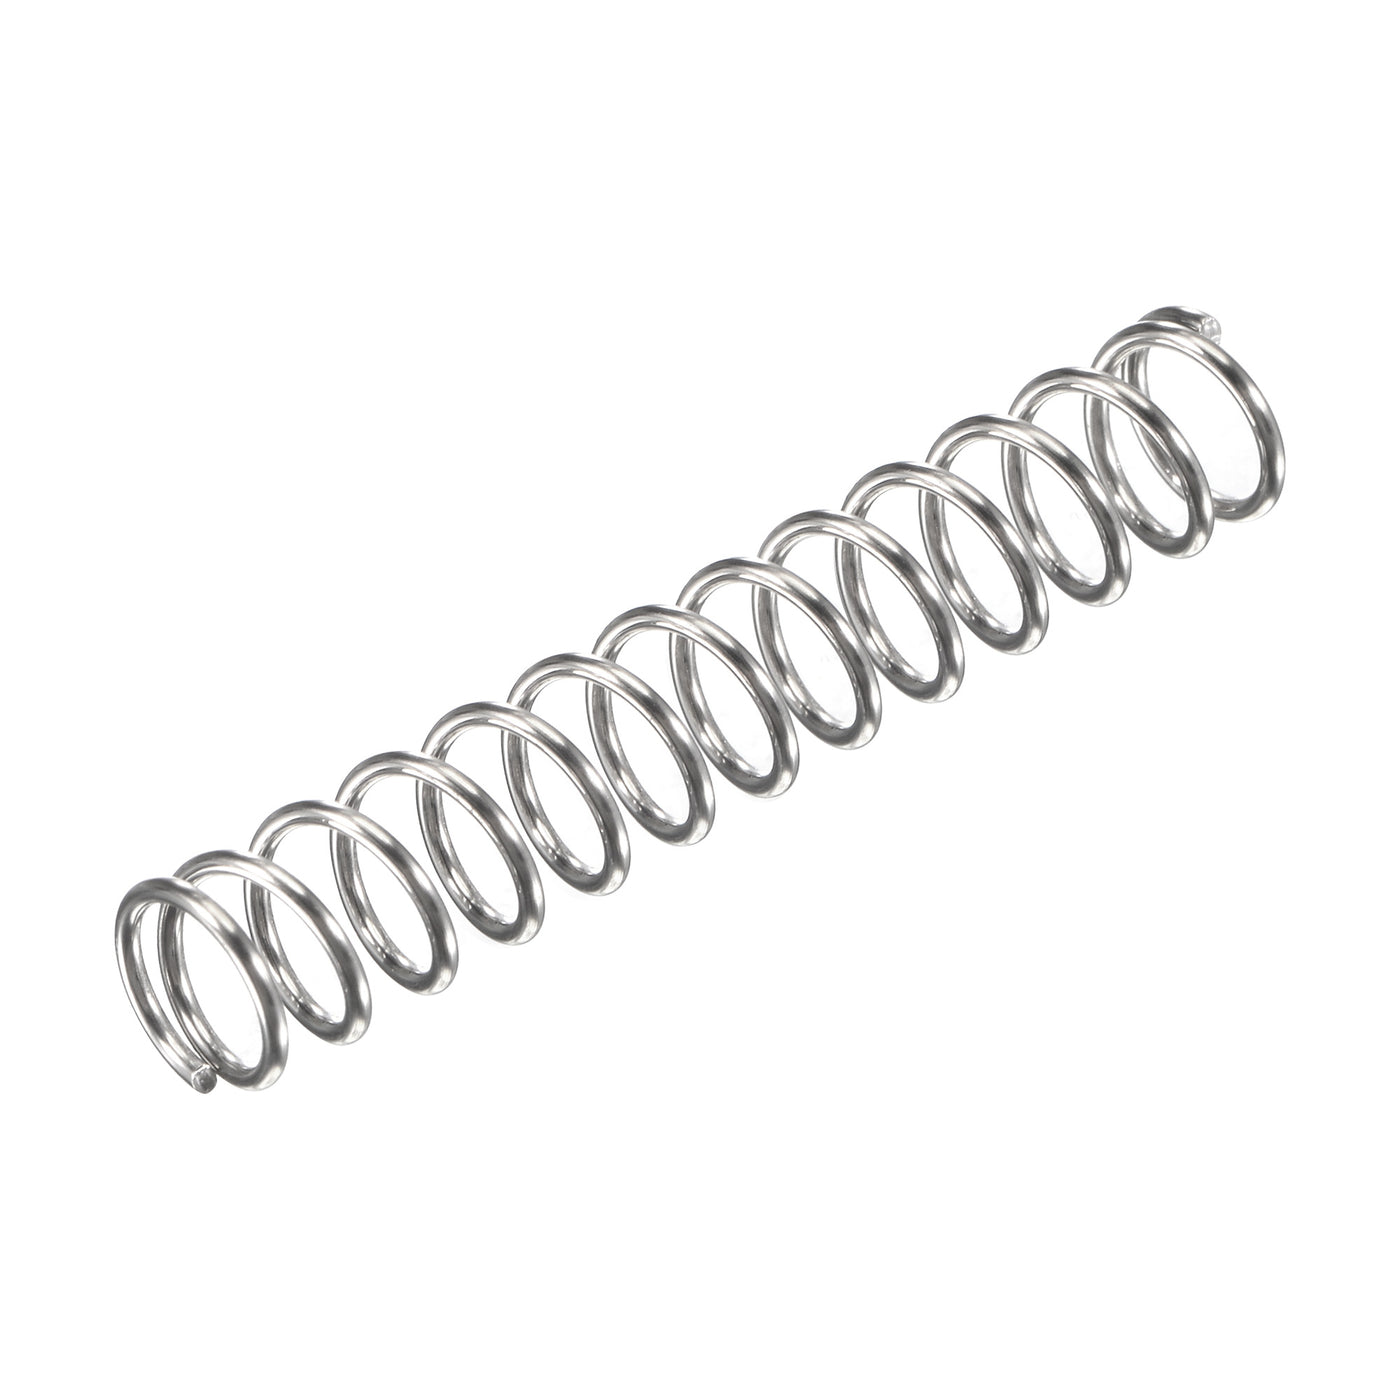 uxcell Uxcell 7mmx0.8mmx35mm 304 Stainless Steel Compression Spring 17.2N Load Capacity 10pcs